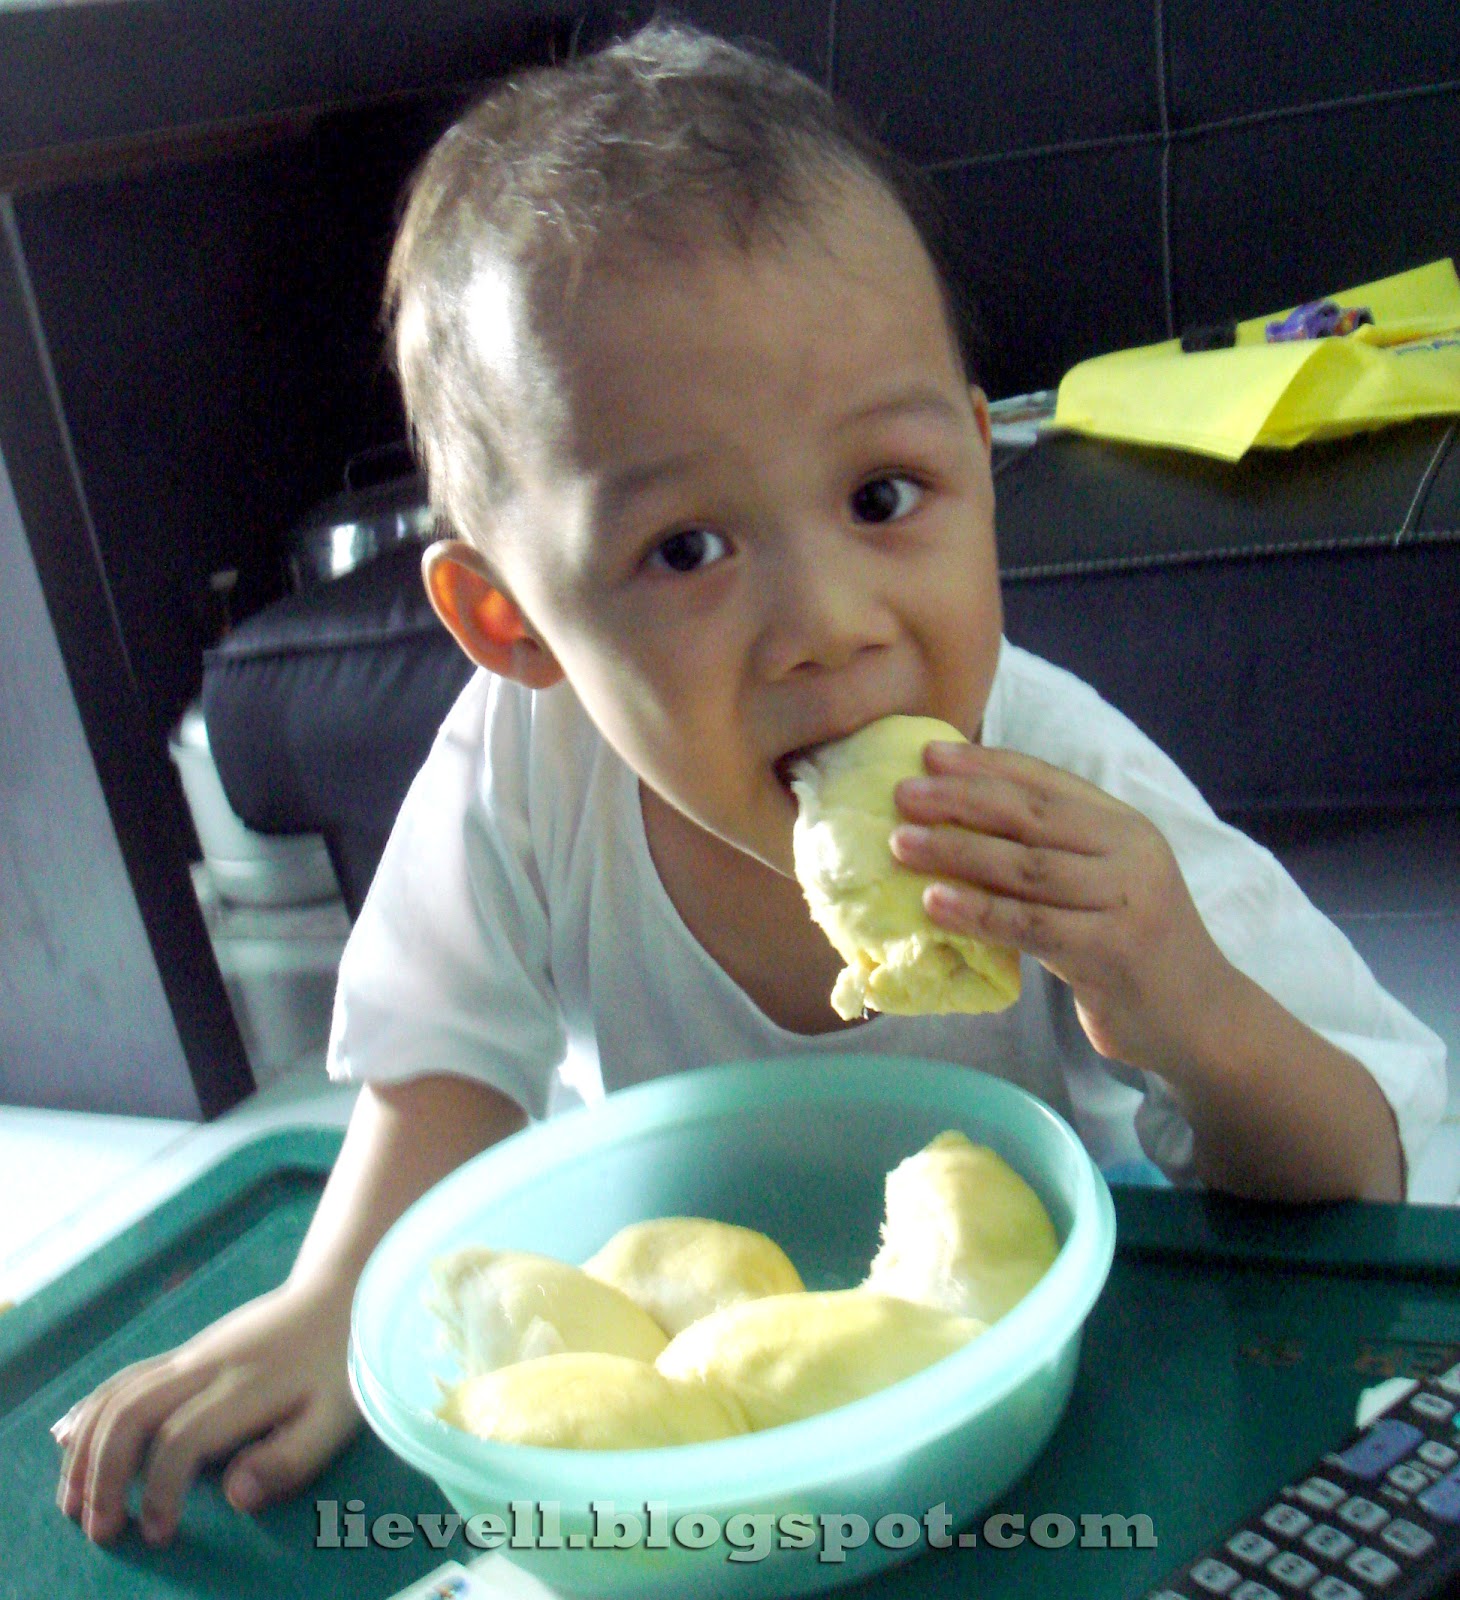 Simply-hood: Miscellaneous : Eating Durian